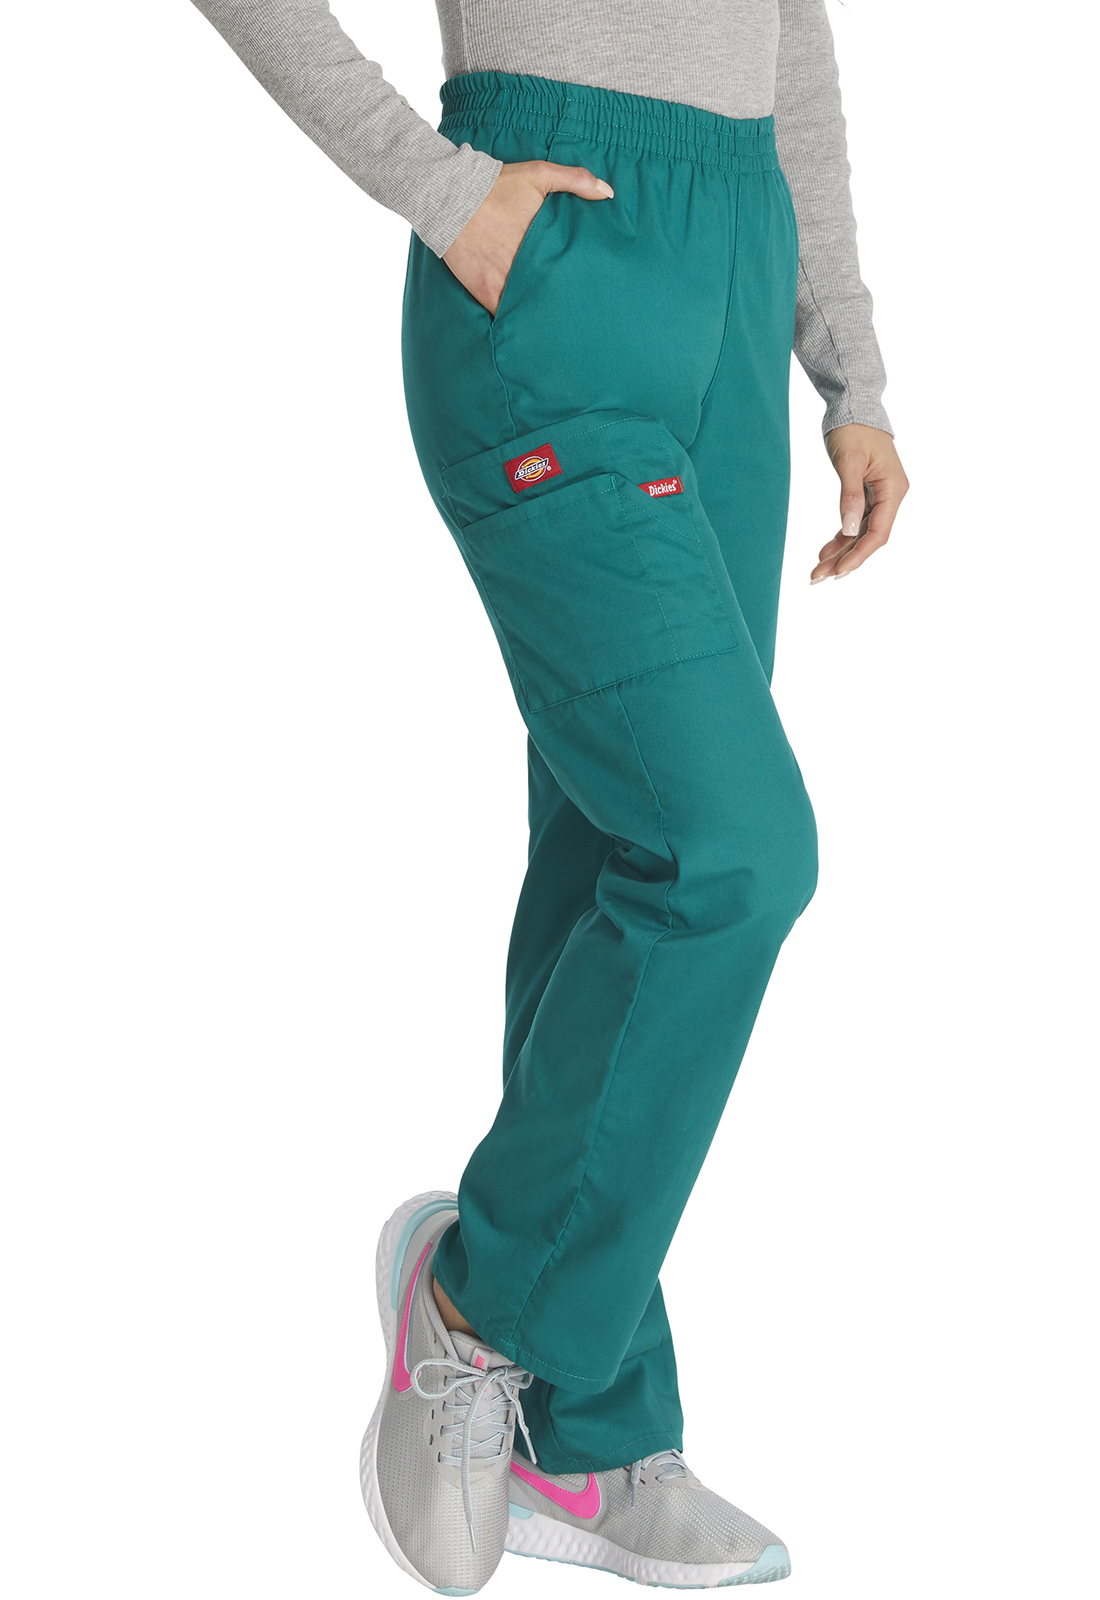 Dickies EDS Signature Scrubs Pant for Women Natural Rise Tapered Leg Pull-On Plus Size 86106, 4XL, Hunter - image 5 of 7